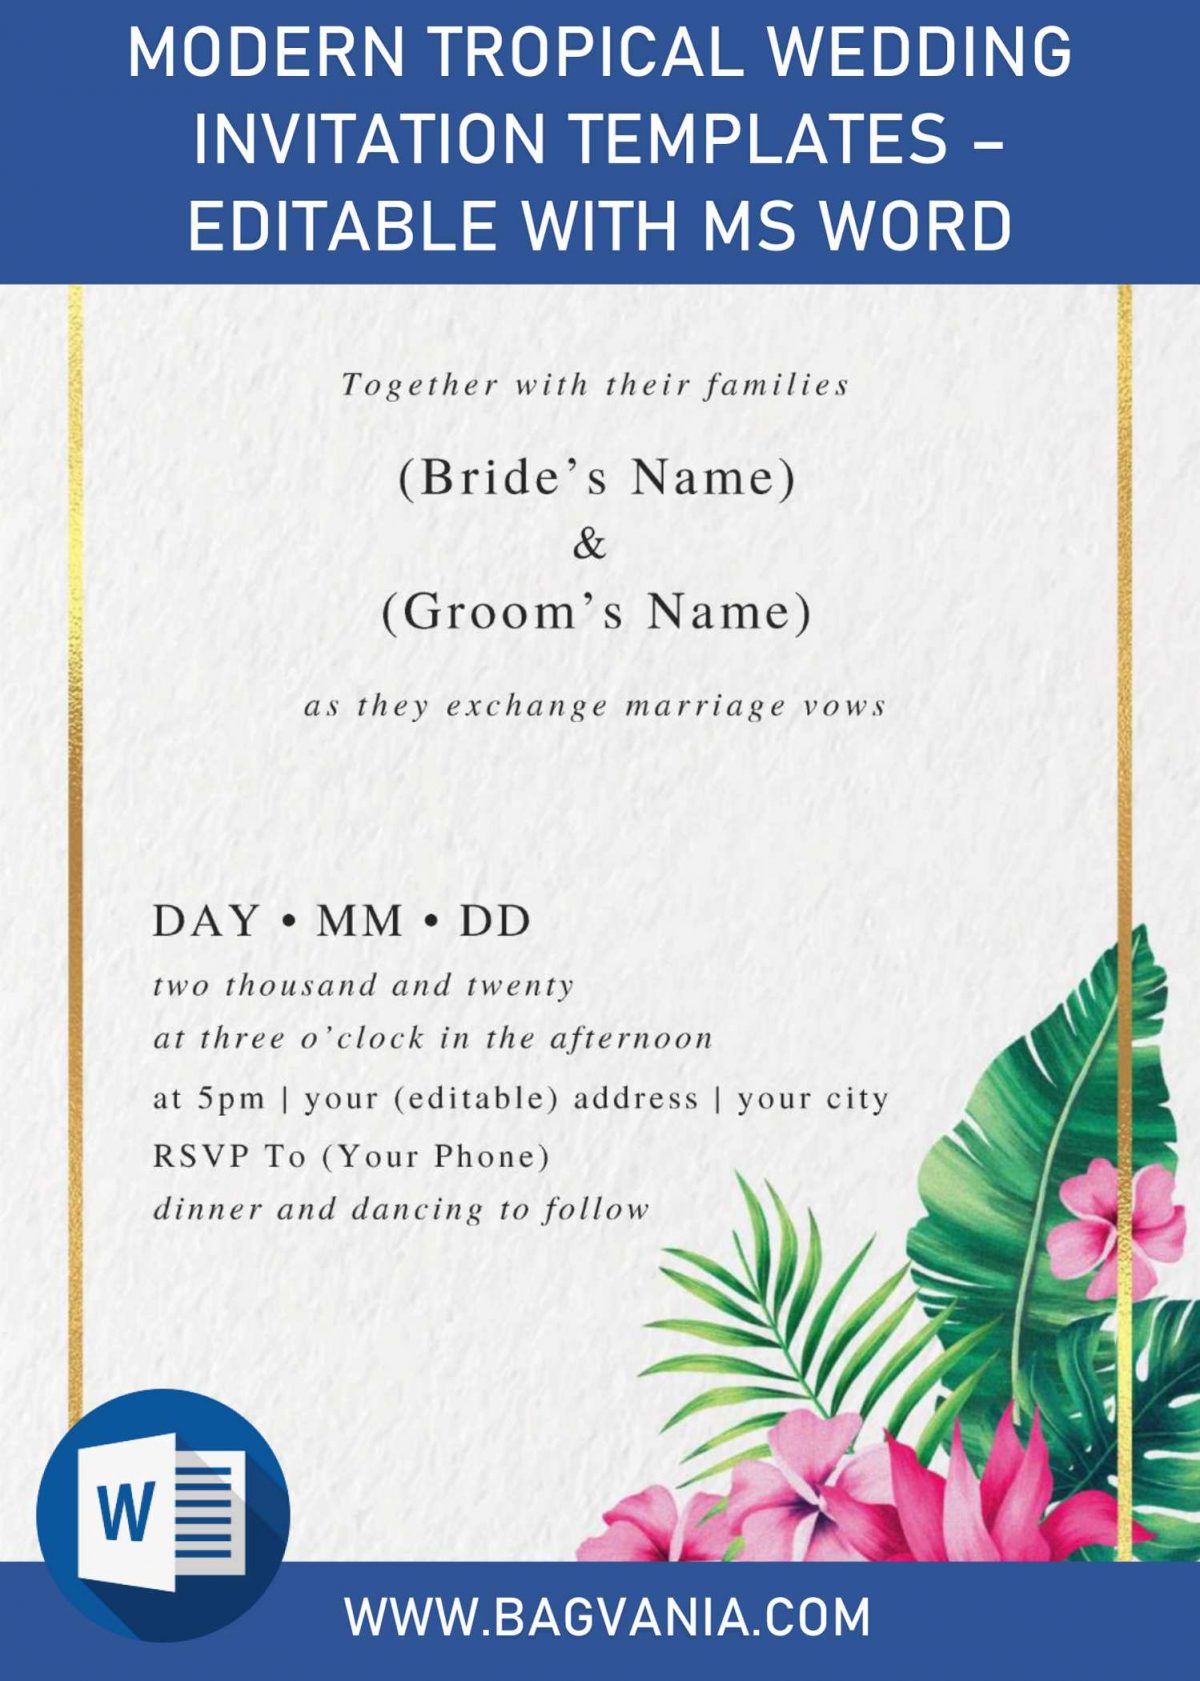 Modern Tropical Wedding Invitation Templates - Editable With MS Word and has luau party theme